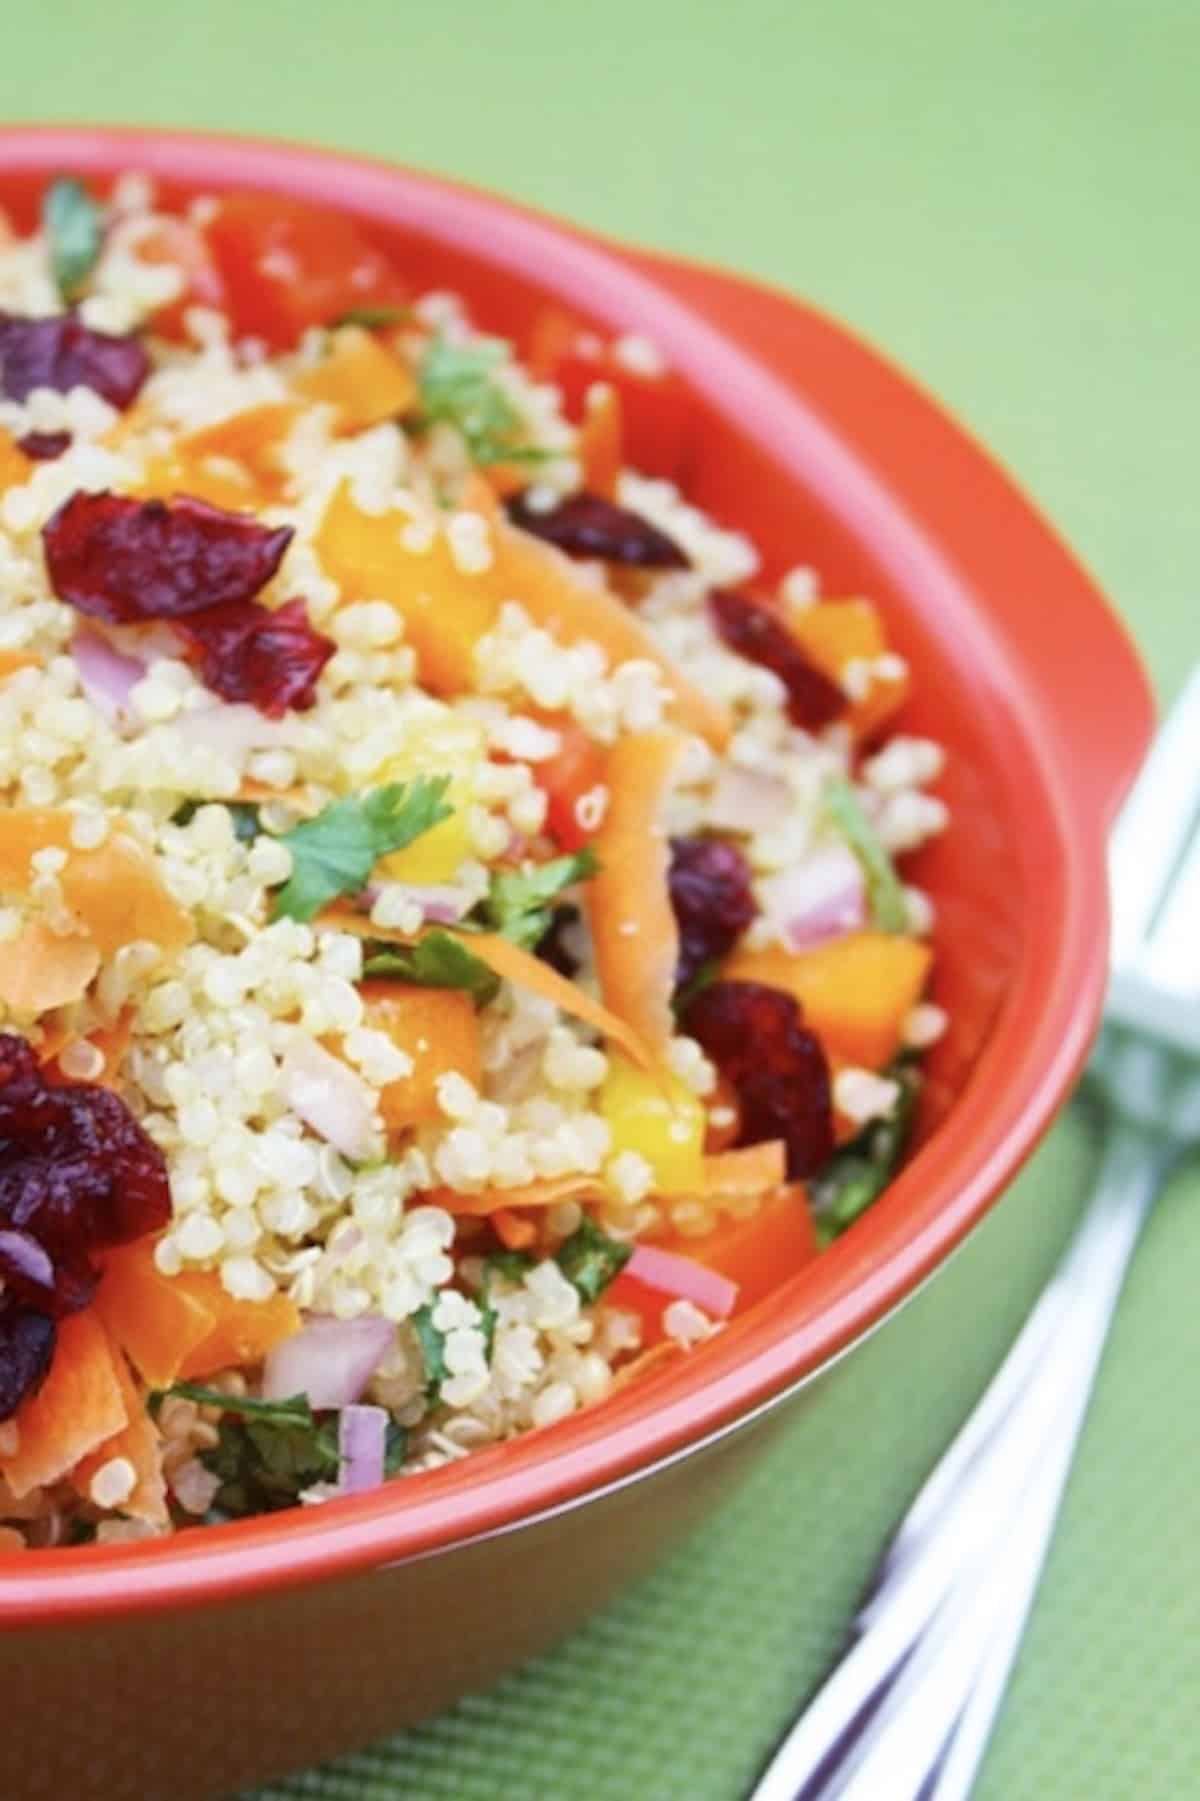 Vegetable quinoa salad with carrots and cranberries in a red bowl.